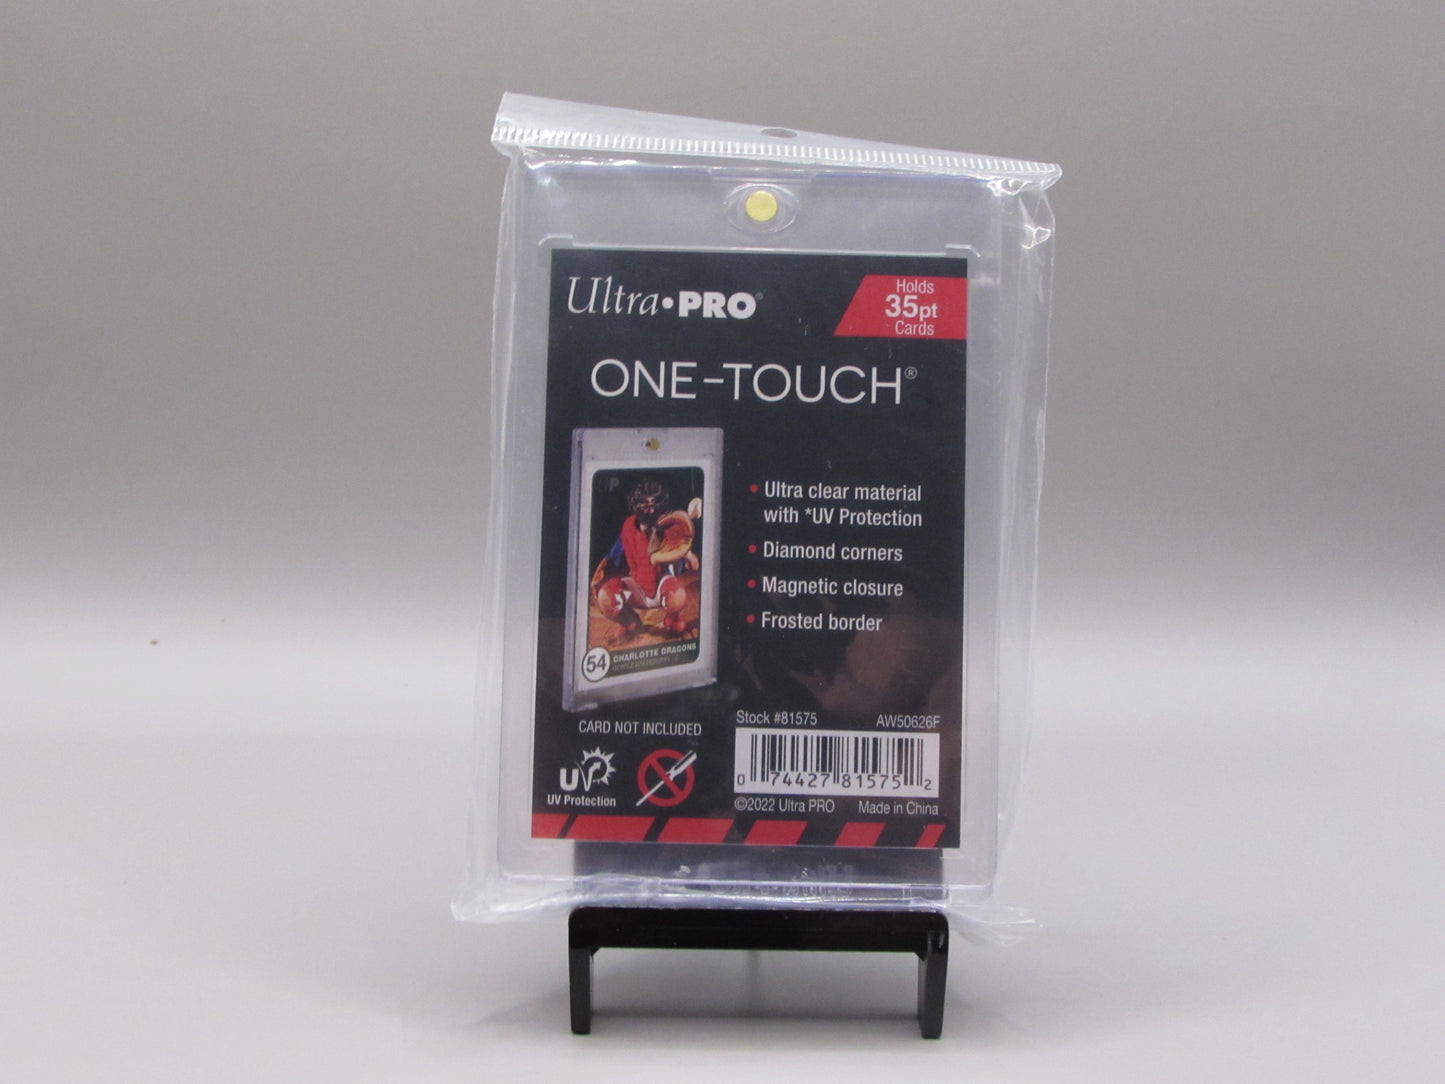 Ultra pro 35pt one-touch